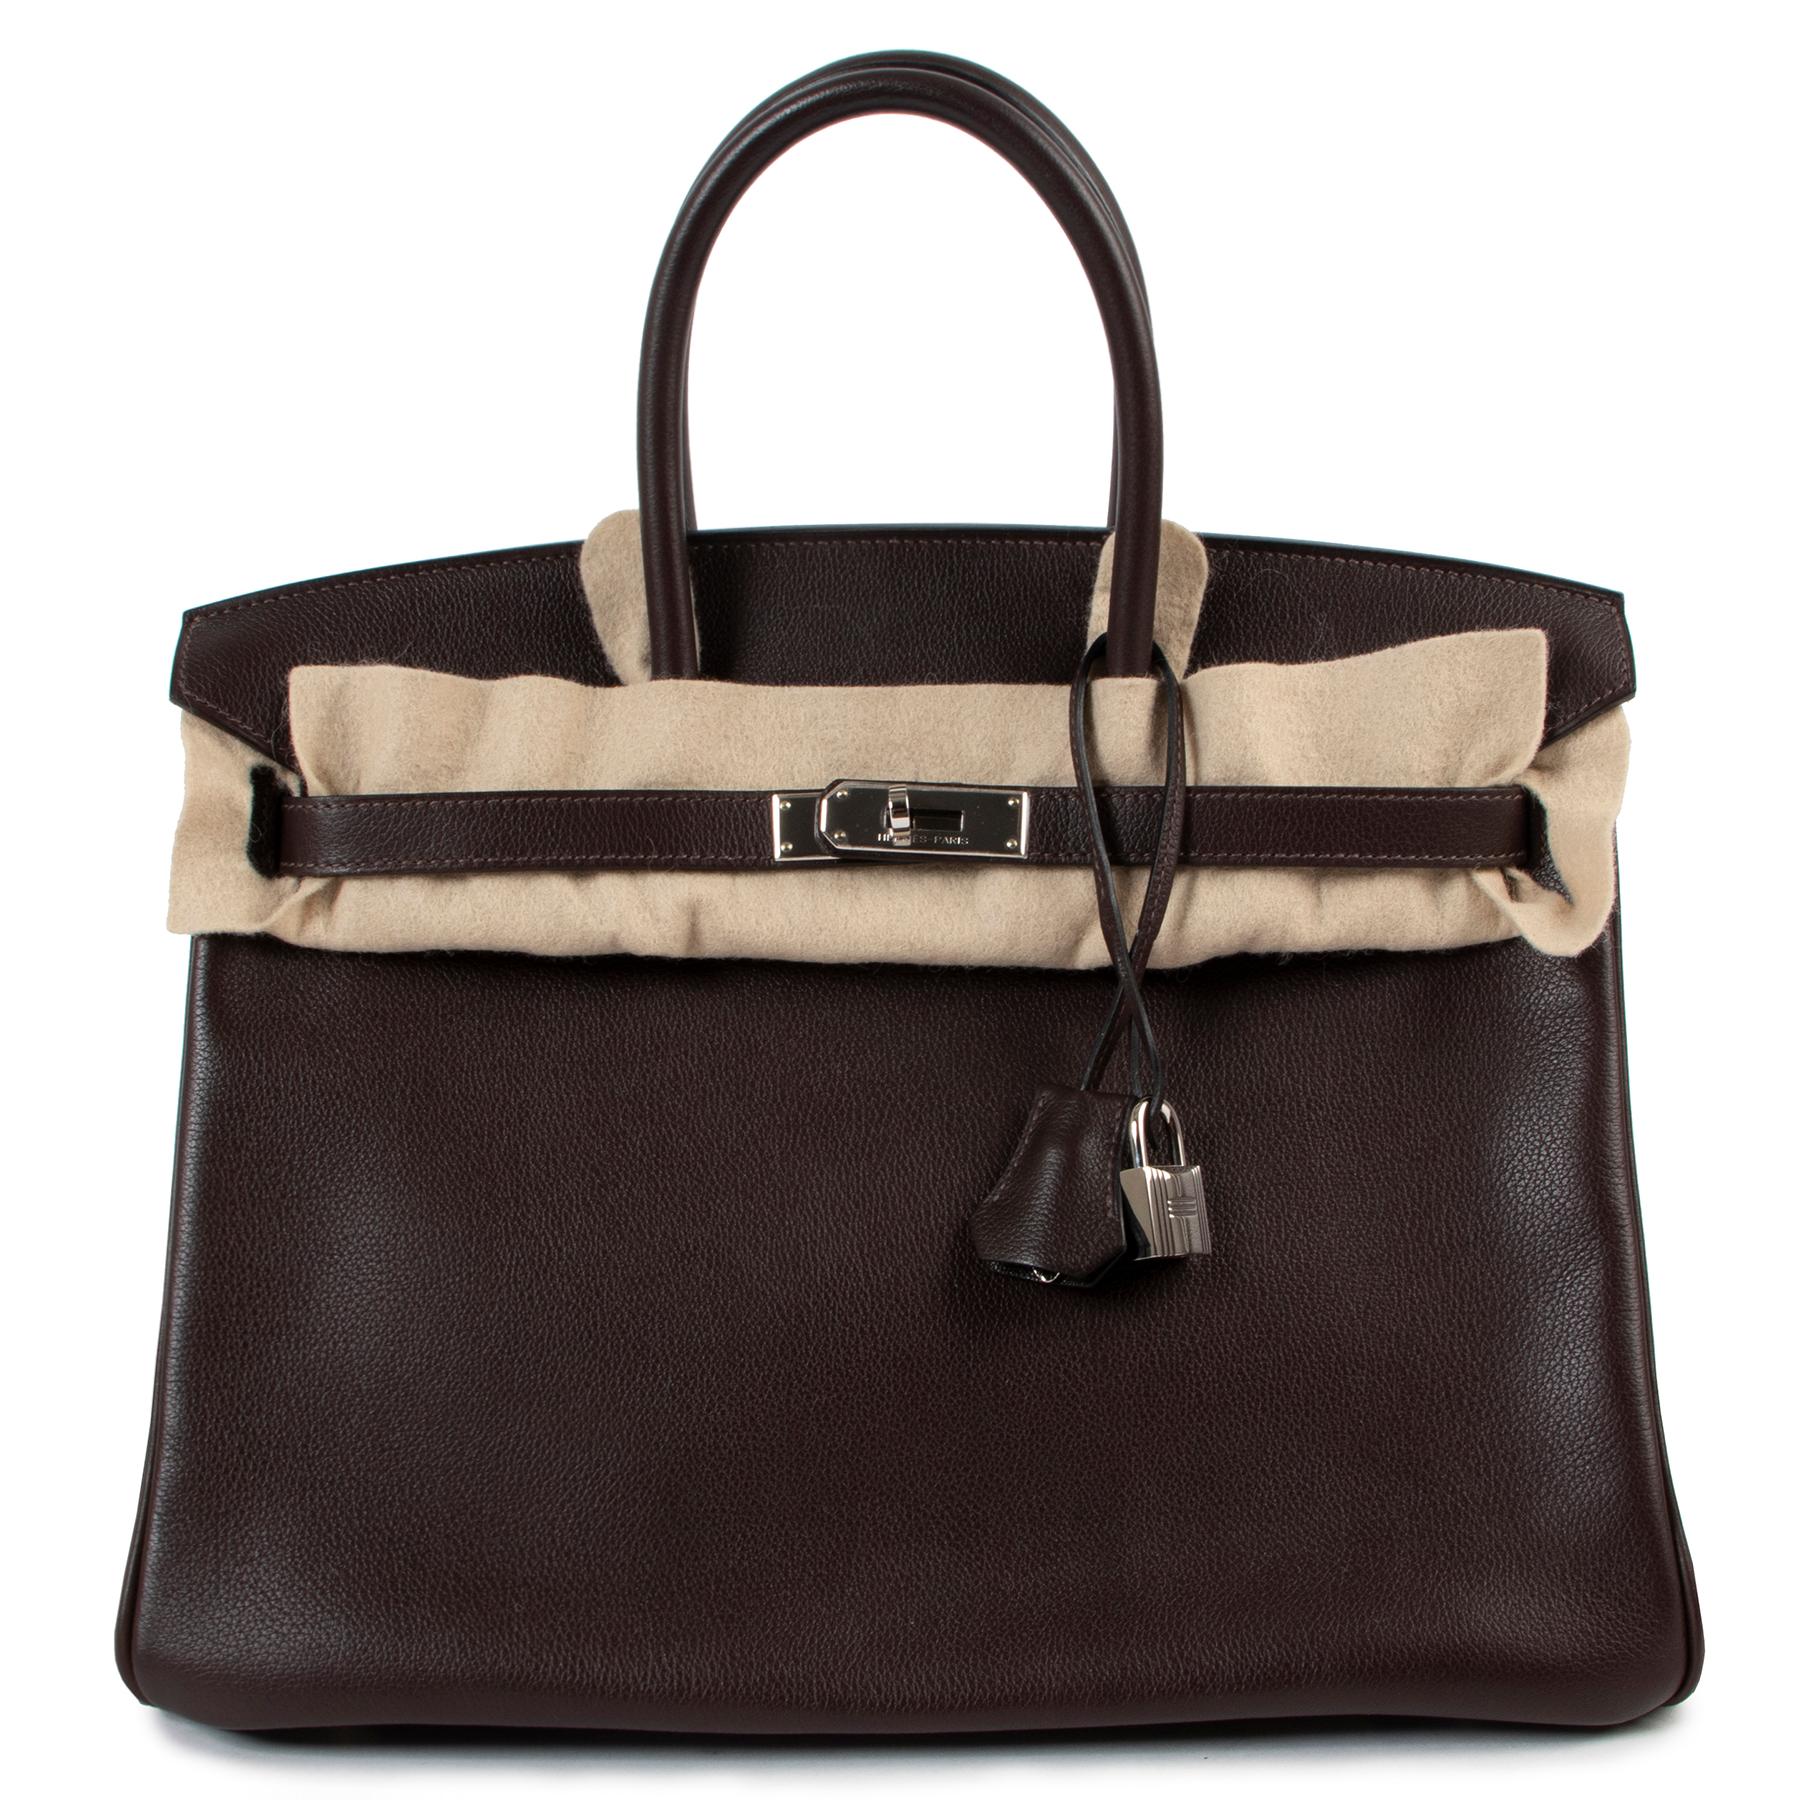 Hermès Birkin 35 Ebene Veau Evergrain Doublure Chevre PHW

This Hermès Birkin 35 Ebene Veau Evergrain Doublure Chevre PHW is a sophisticated addition to your everyday wardrobe. Its 35 size is the perfect fit to hold all your essentials and is the